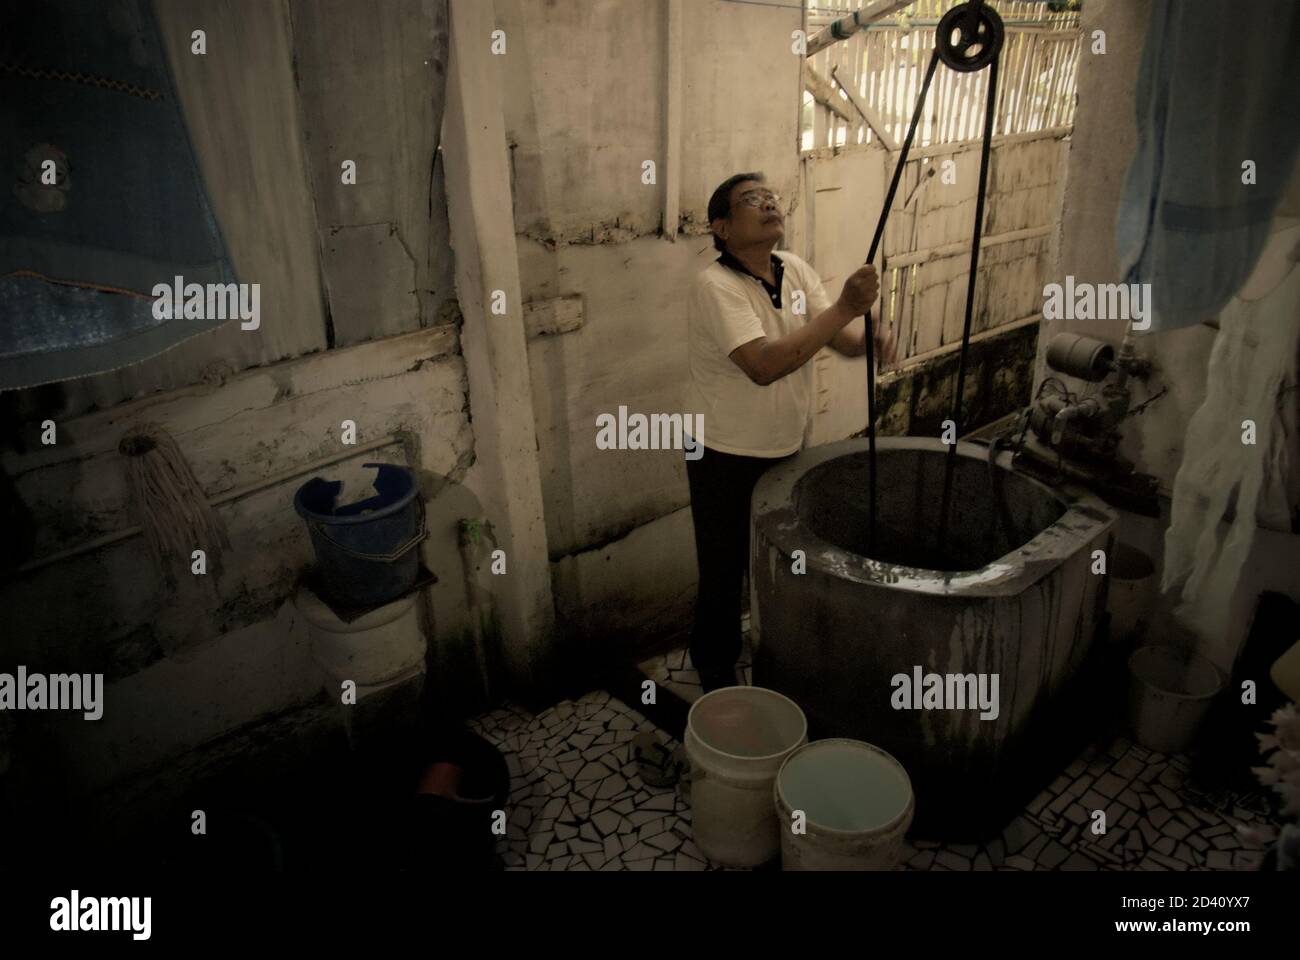 A man is photographed as he is taking water from a water well placed inside his house in a residential area of Jakarta, Indonesia. Stock Photo